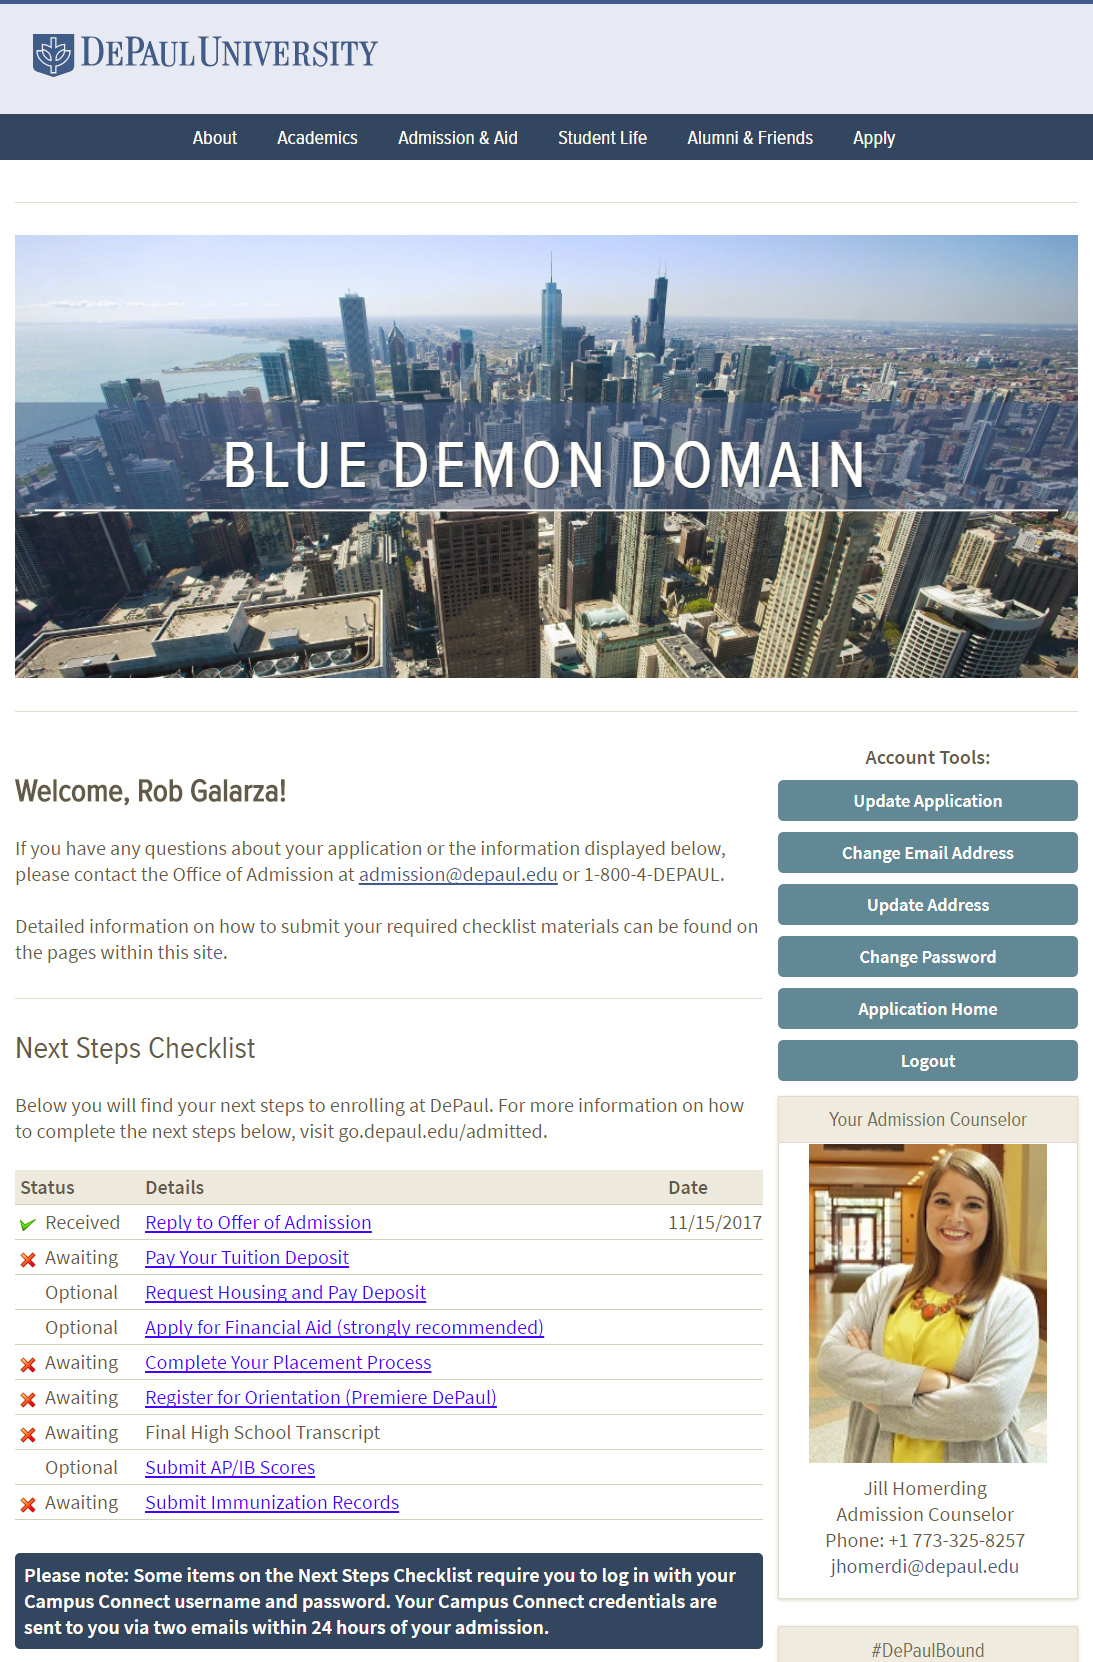 Image of Blue Demon Domain portal for admitted students